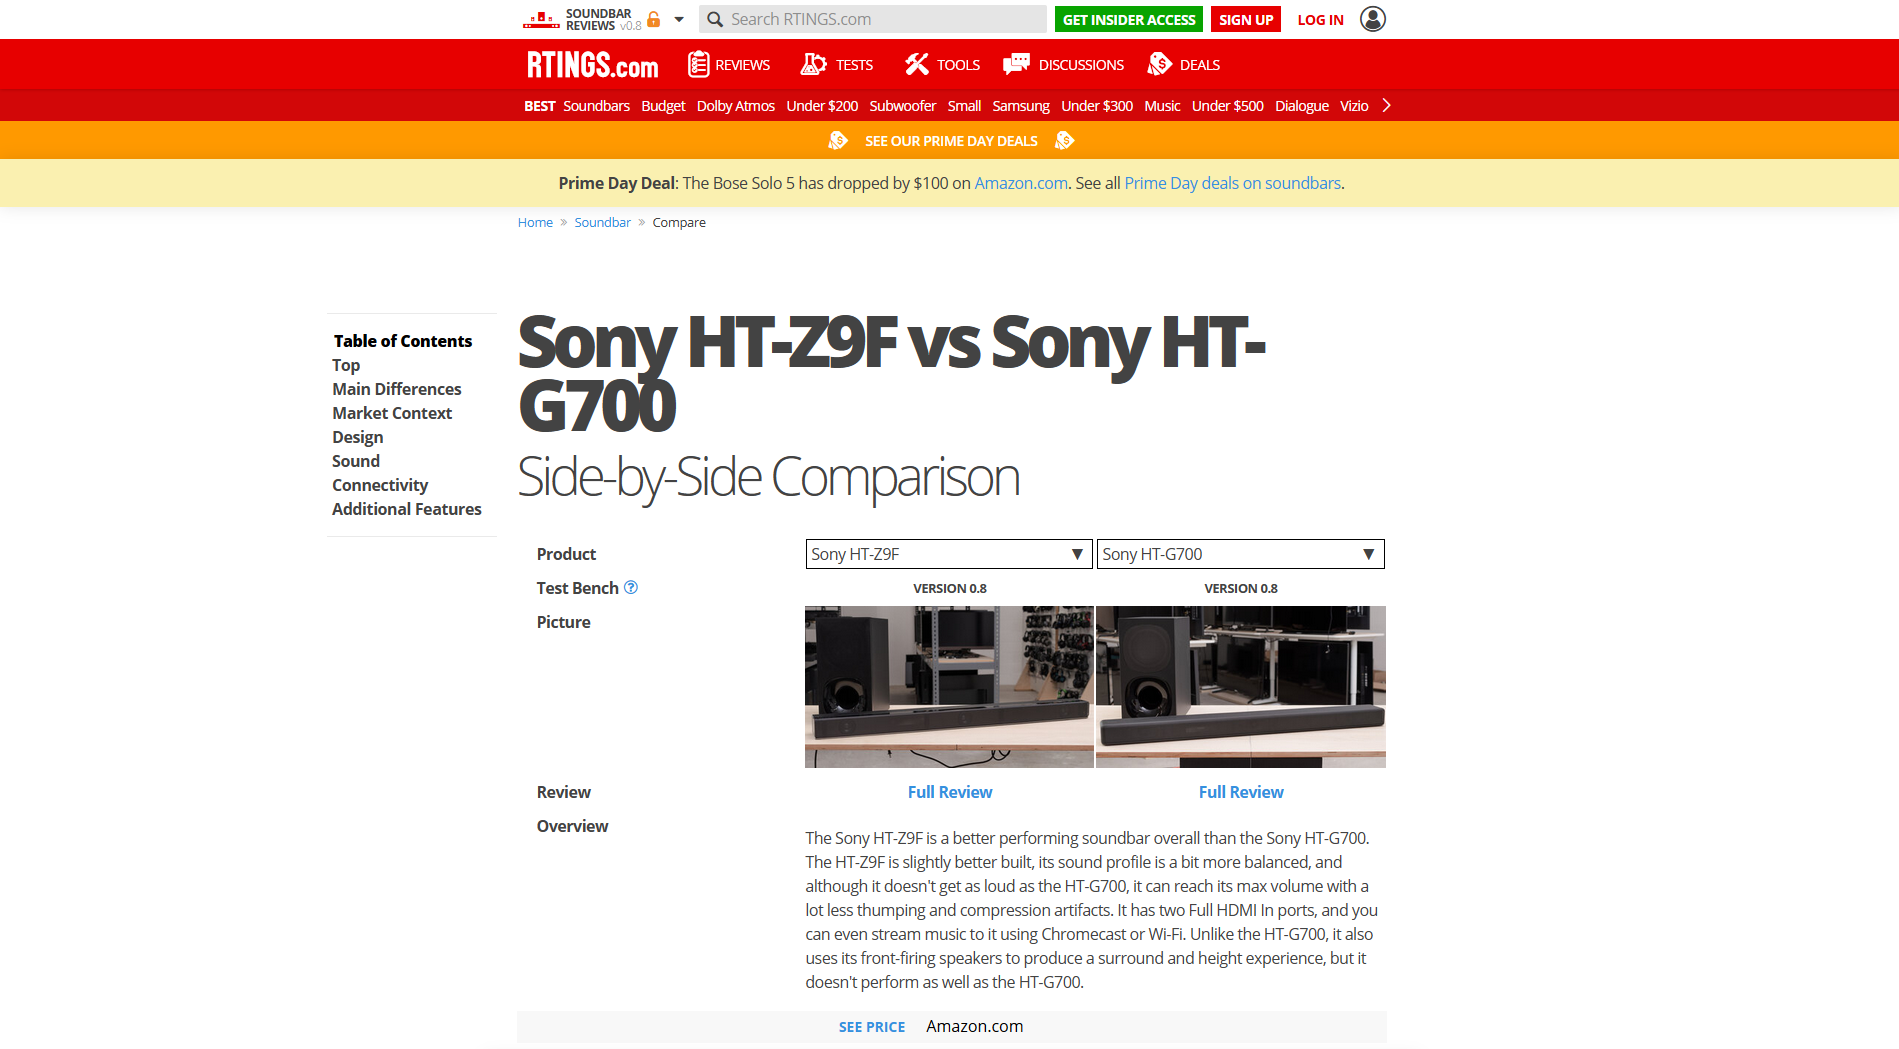 2020-10-14 10_21_55-Sony HT-Z9F vs Sony HT-G700 Side-by-Side Comparison - RTINGS.com.png